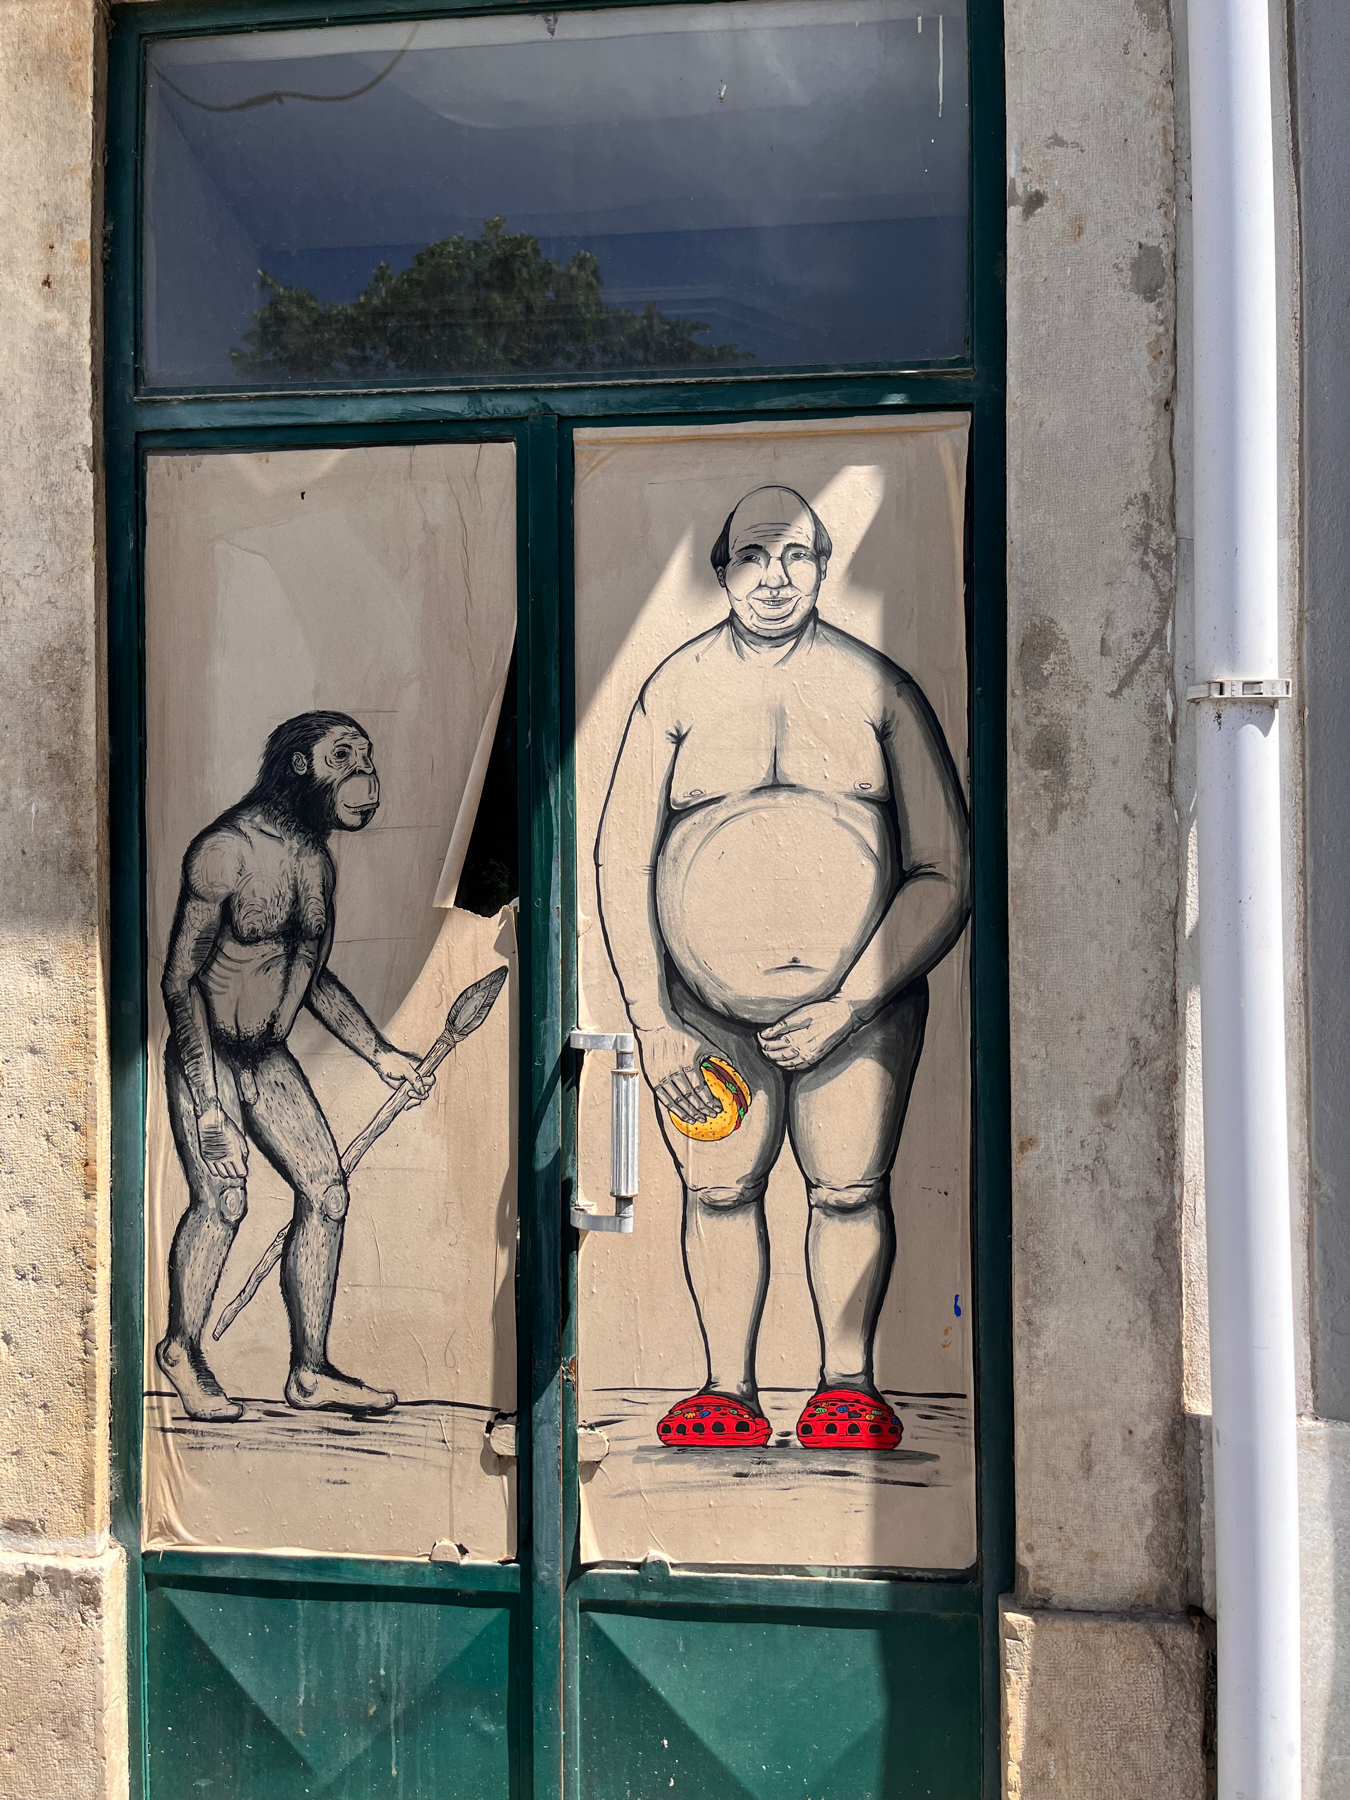 Graffiti art on a door depicting an evolutionary transition from an ape holding a spear to a modern human wearing a beanie and Crocs, while holding a fast-food sandwich and with his hand over his genitals